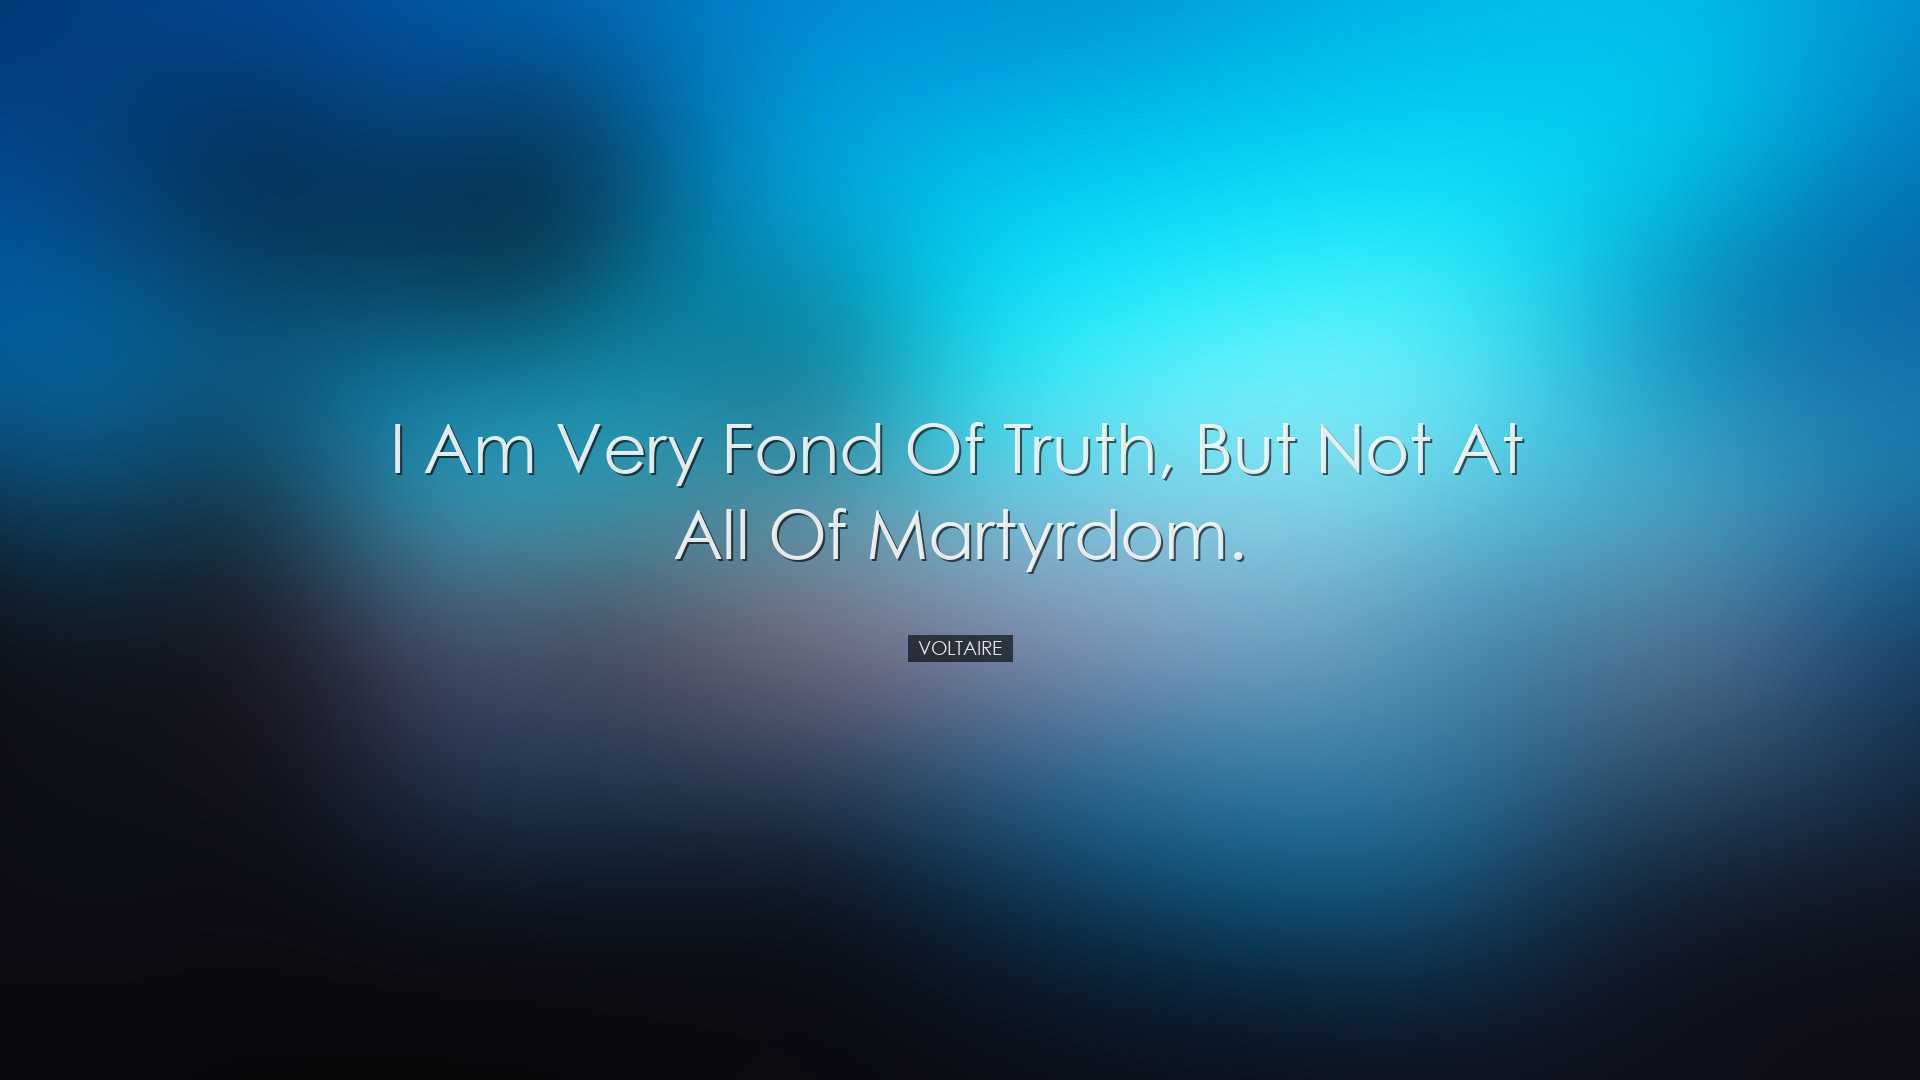 I am very fond of truth, but not at all of martyrdom. - Voltaire